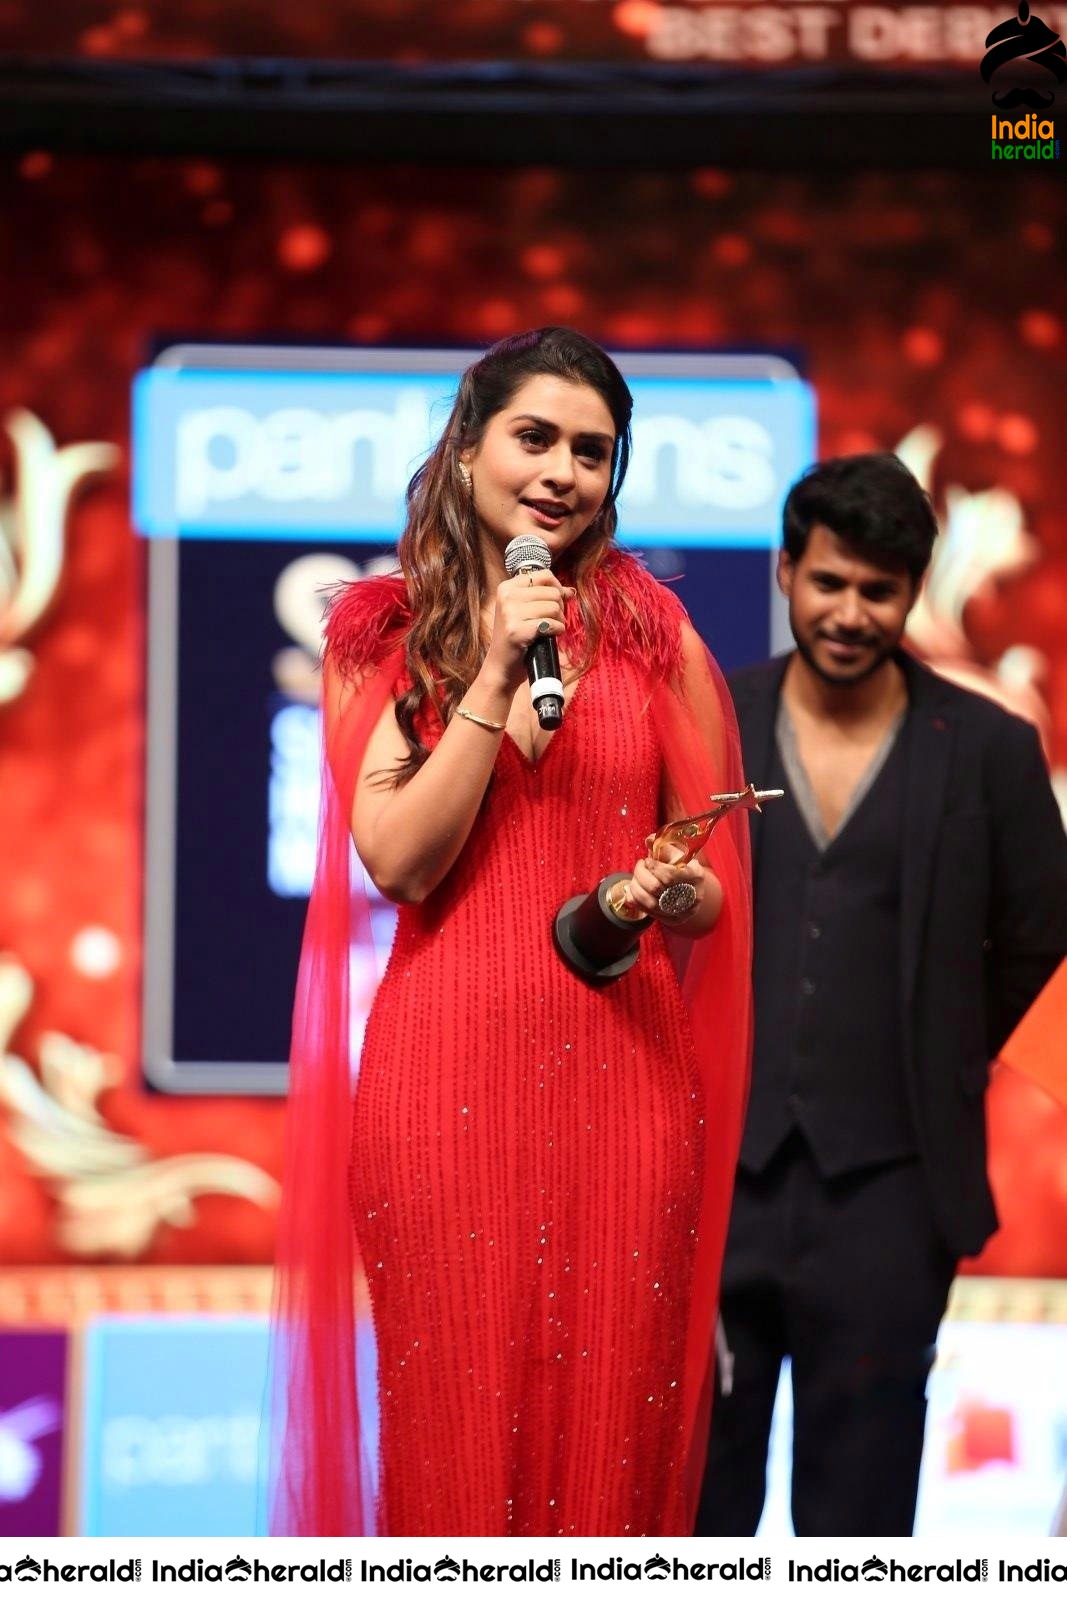 Rare and Unseen Photos from SIIMA Awards as a throwback Set 5